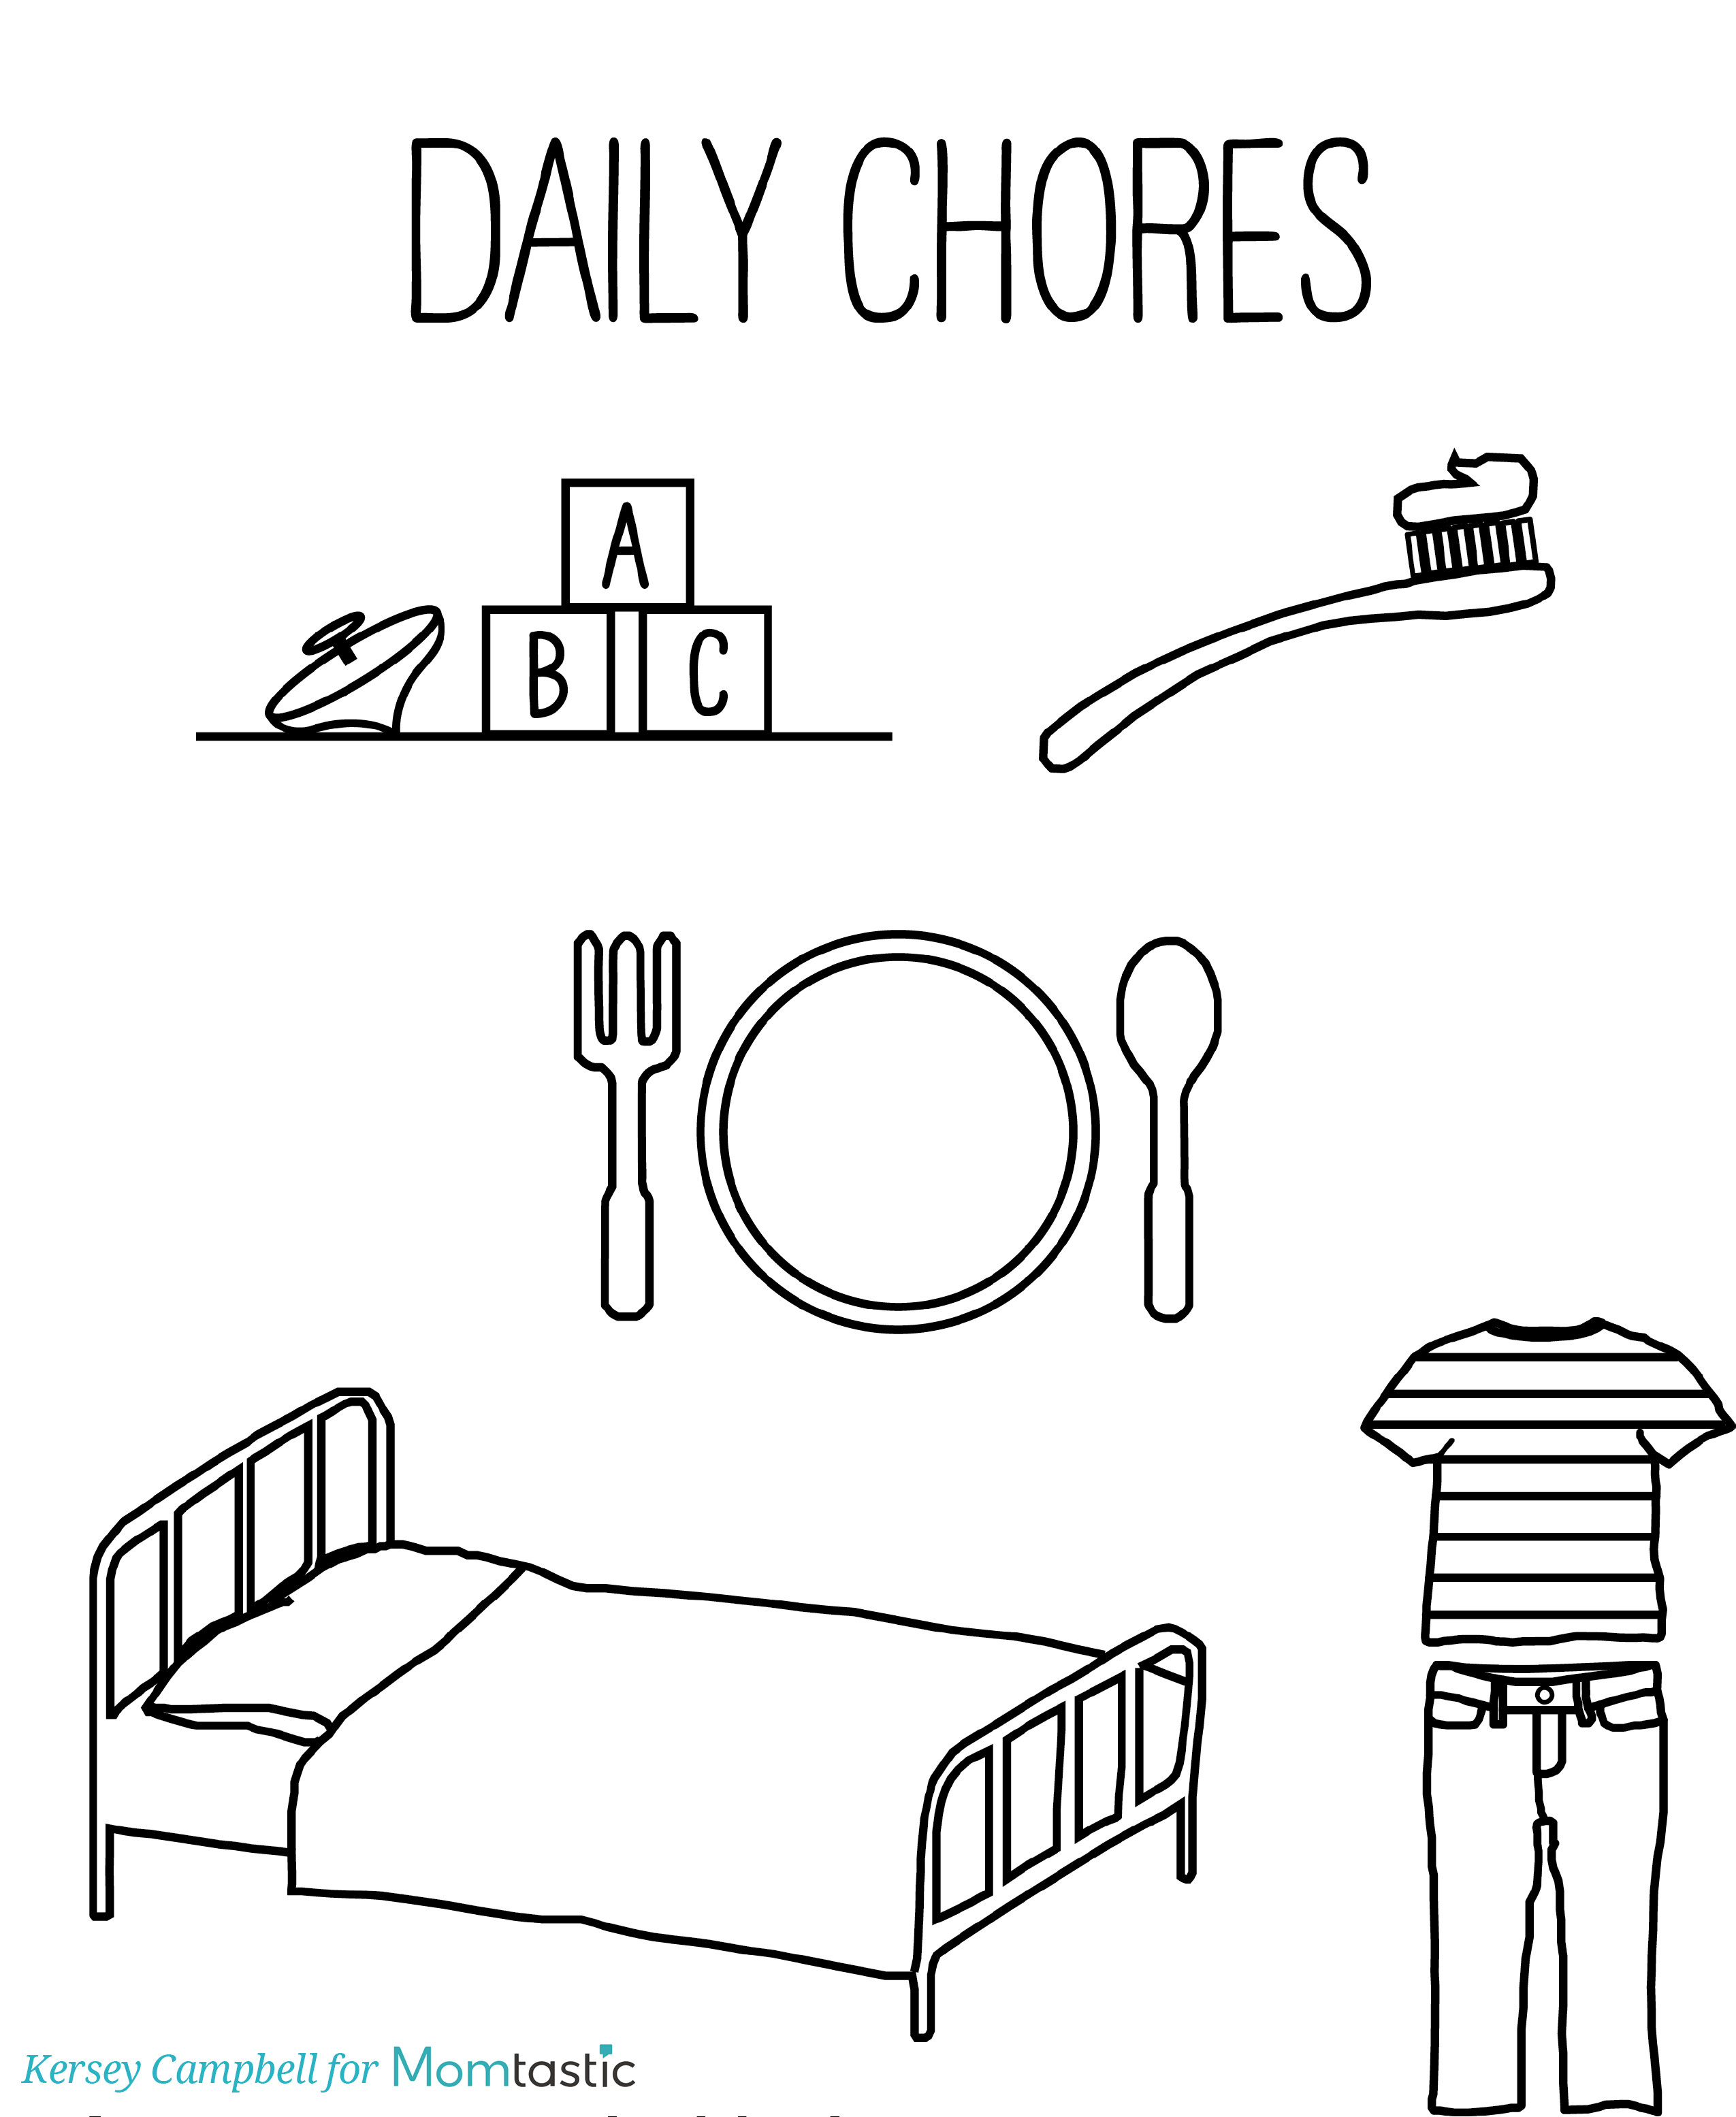 Preschool Coloring Sheets With Household Chores On Them
 This DIY Toddler Chore Chart Is Genius